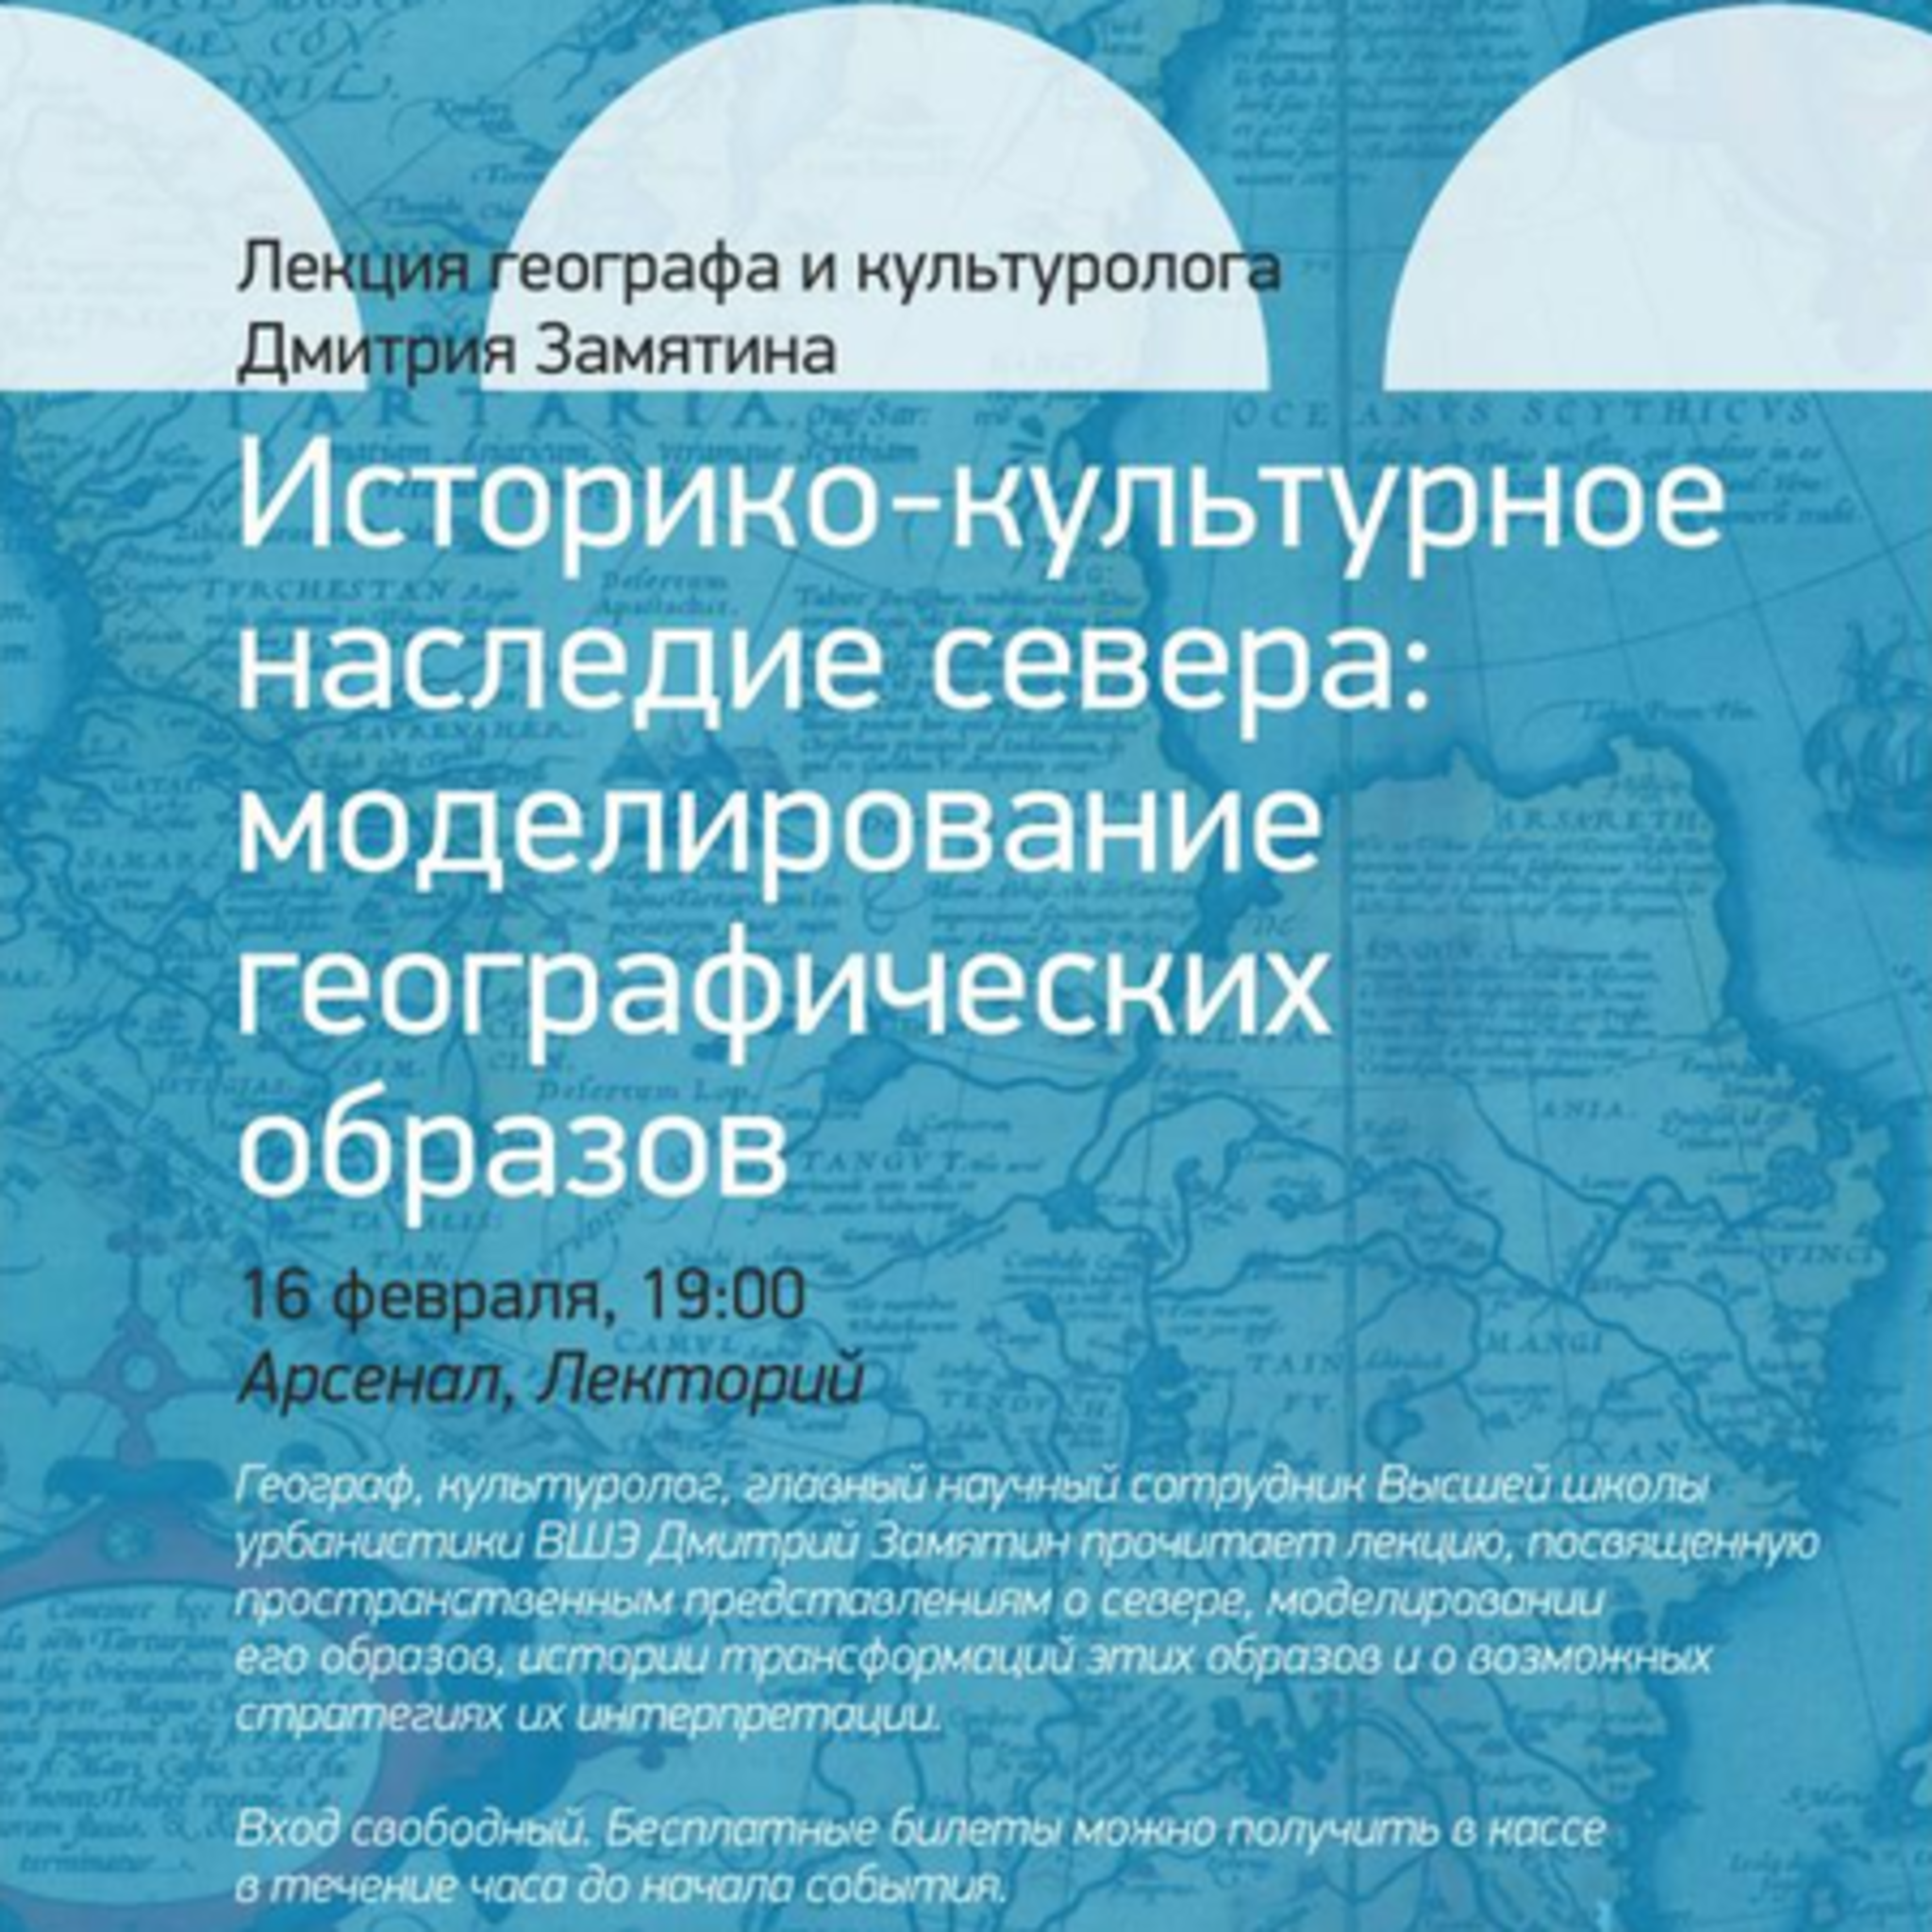 Dmitry Zamyatin Lecture Historical and cultural heritage of the north: modeling of geographic images